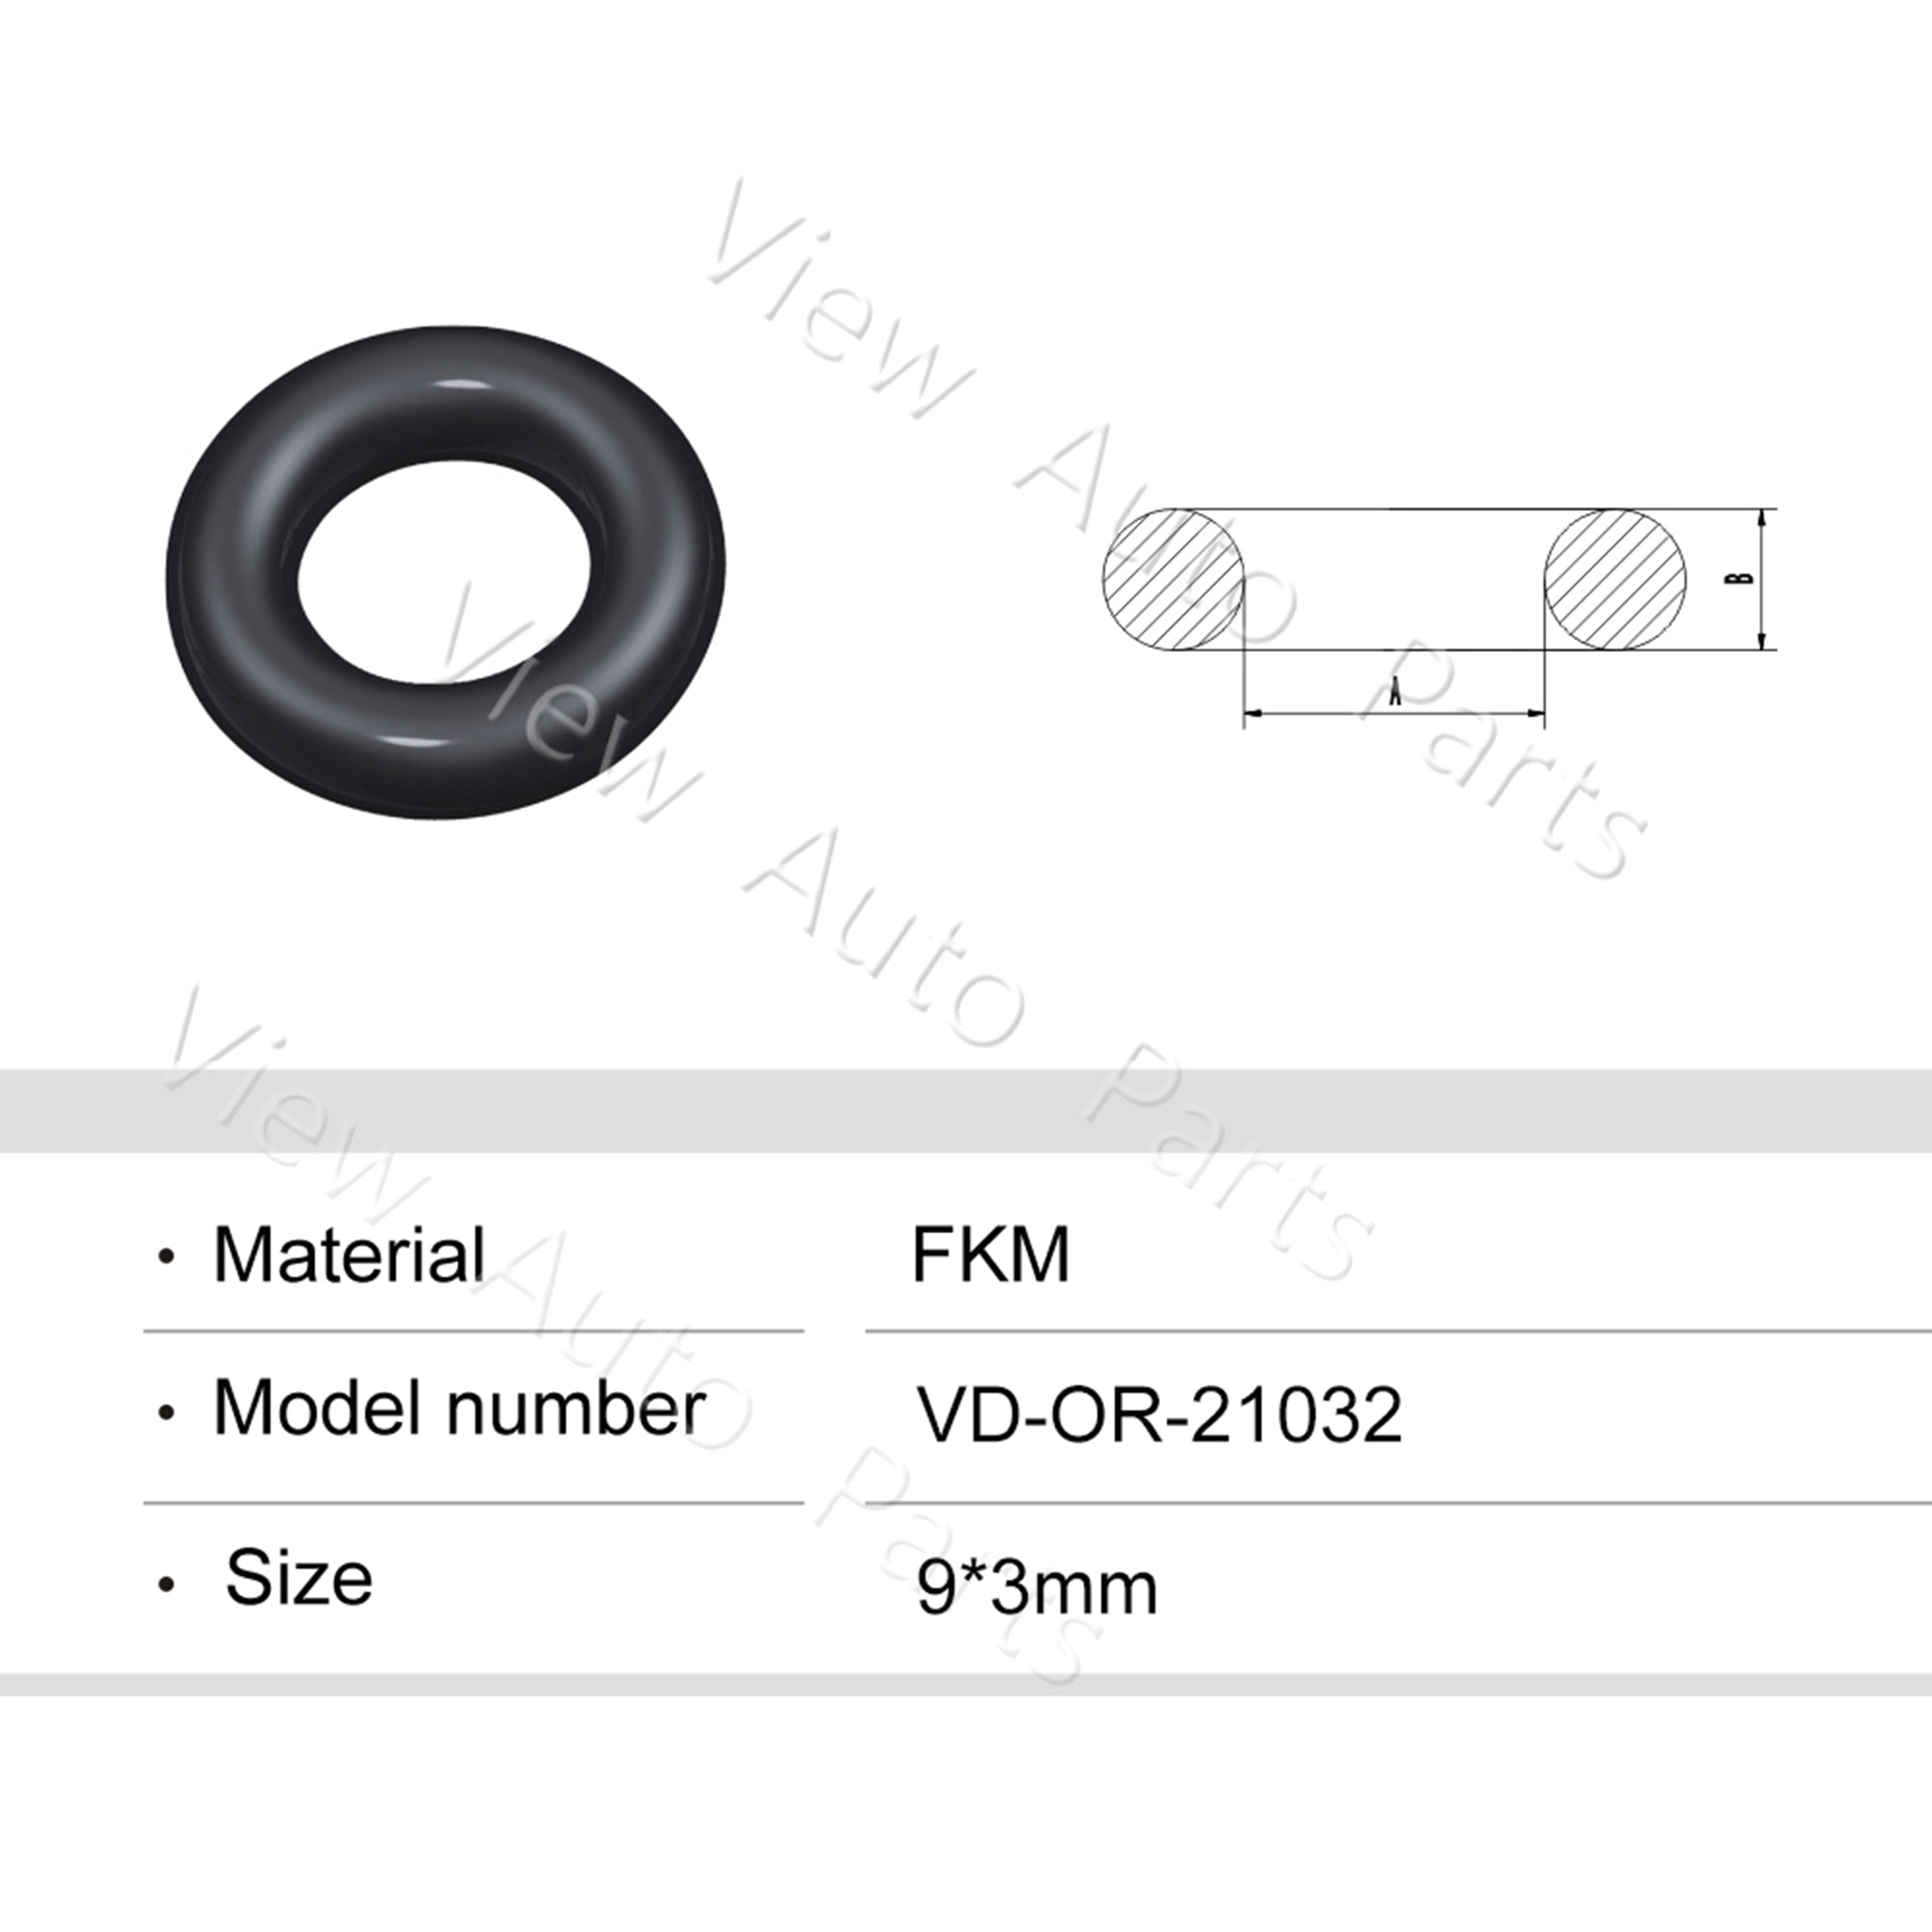 Fuel Injector Rubber Seal Orings for Toyota Fuel Injector Repair Kits FKM & Rubber Heat Resistant, Size: 9*3mm OR-21032